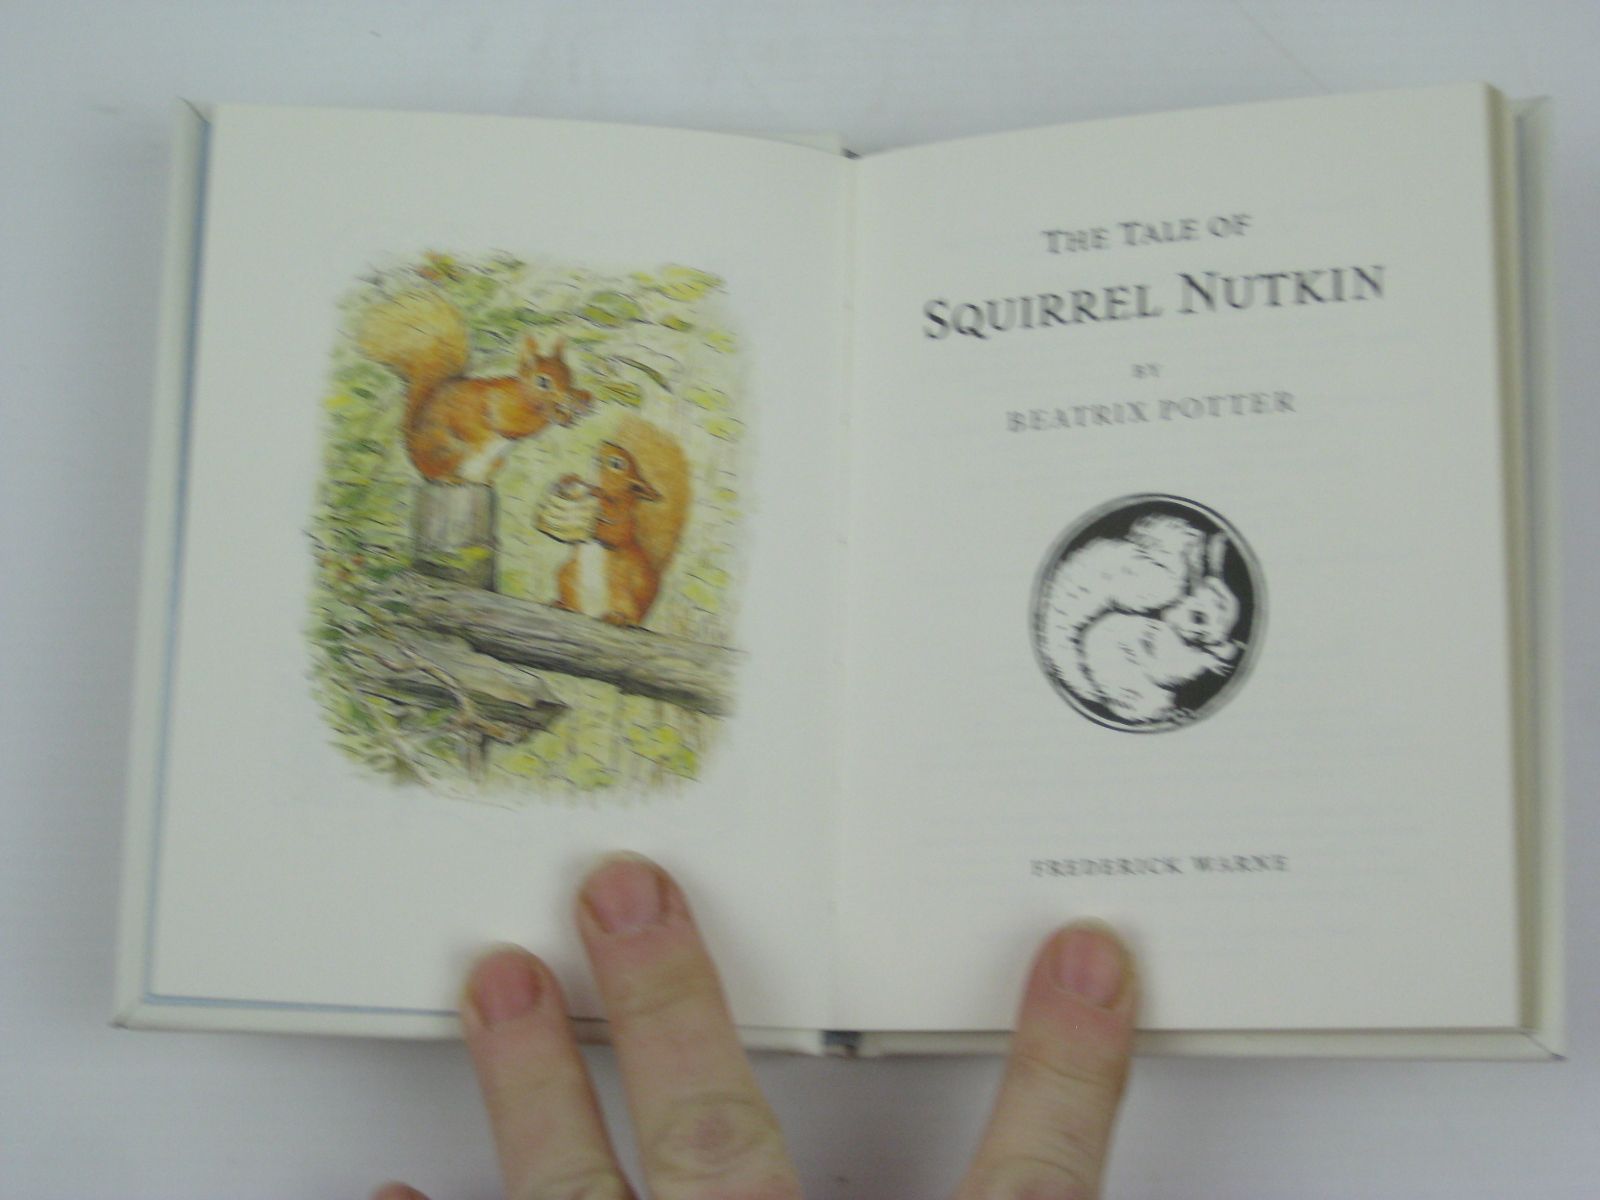 Photo of THE TALE OF SQUIRREL NUTKIN written by Potter, Beatrix illustrated by Potter, Beatrix published by Frederick Warne, The Penguin Group (STOCK CODE: 1316342)  for sale by Stella & Rose's Books